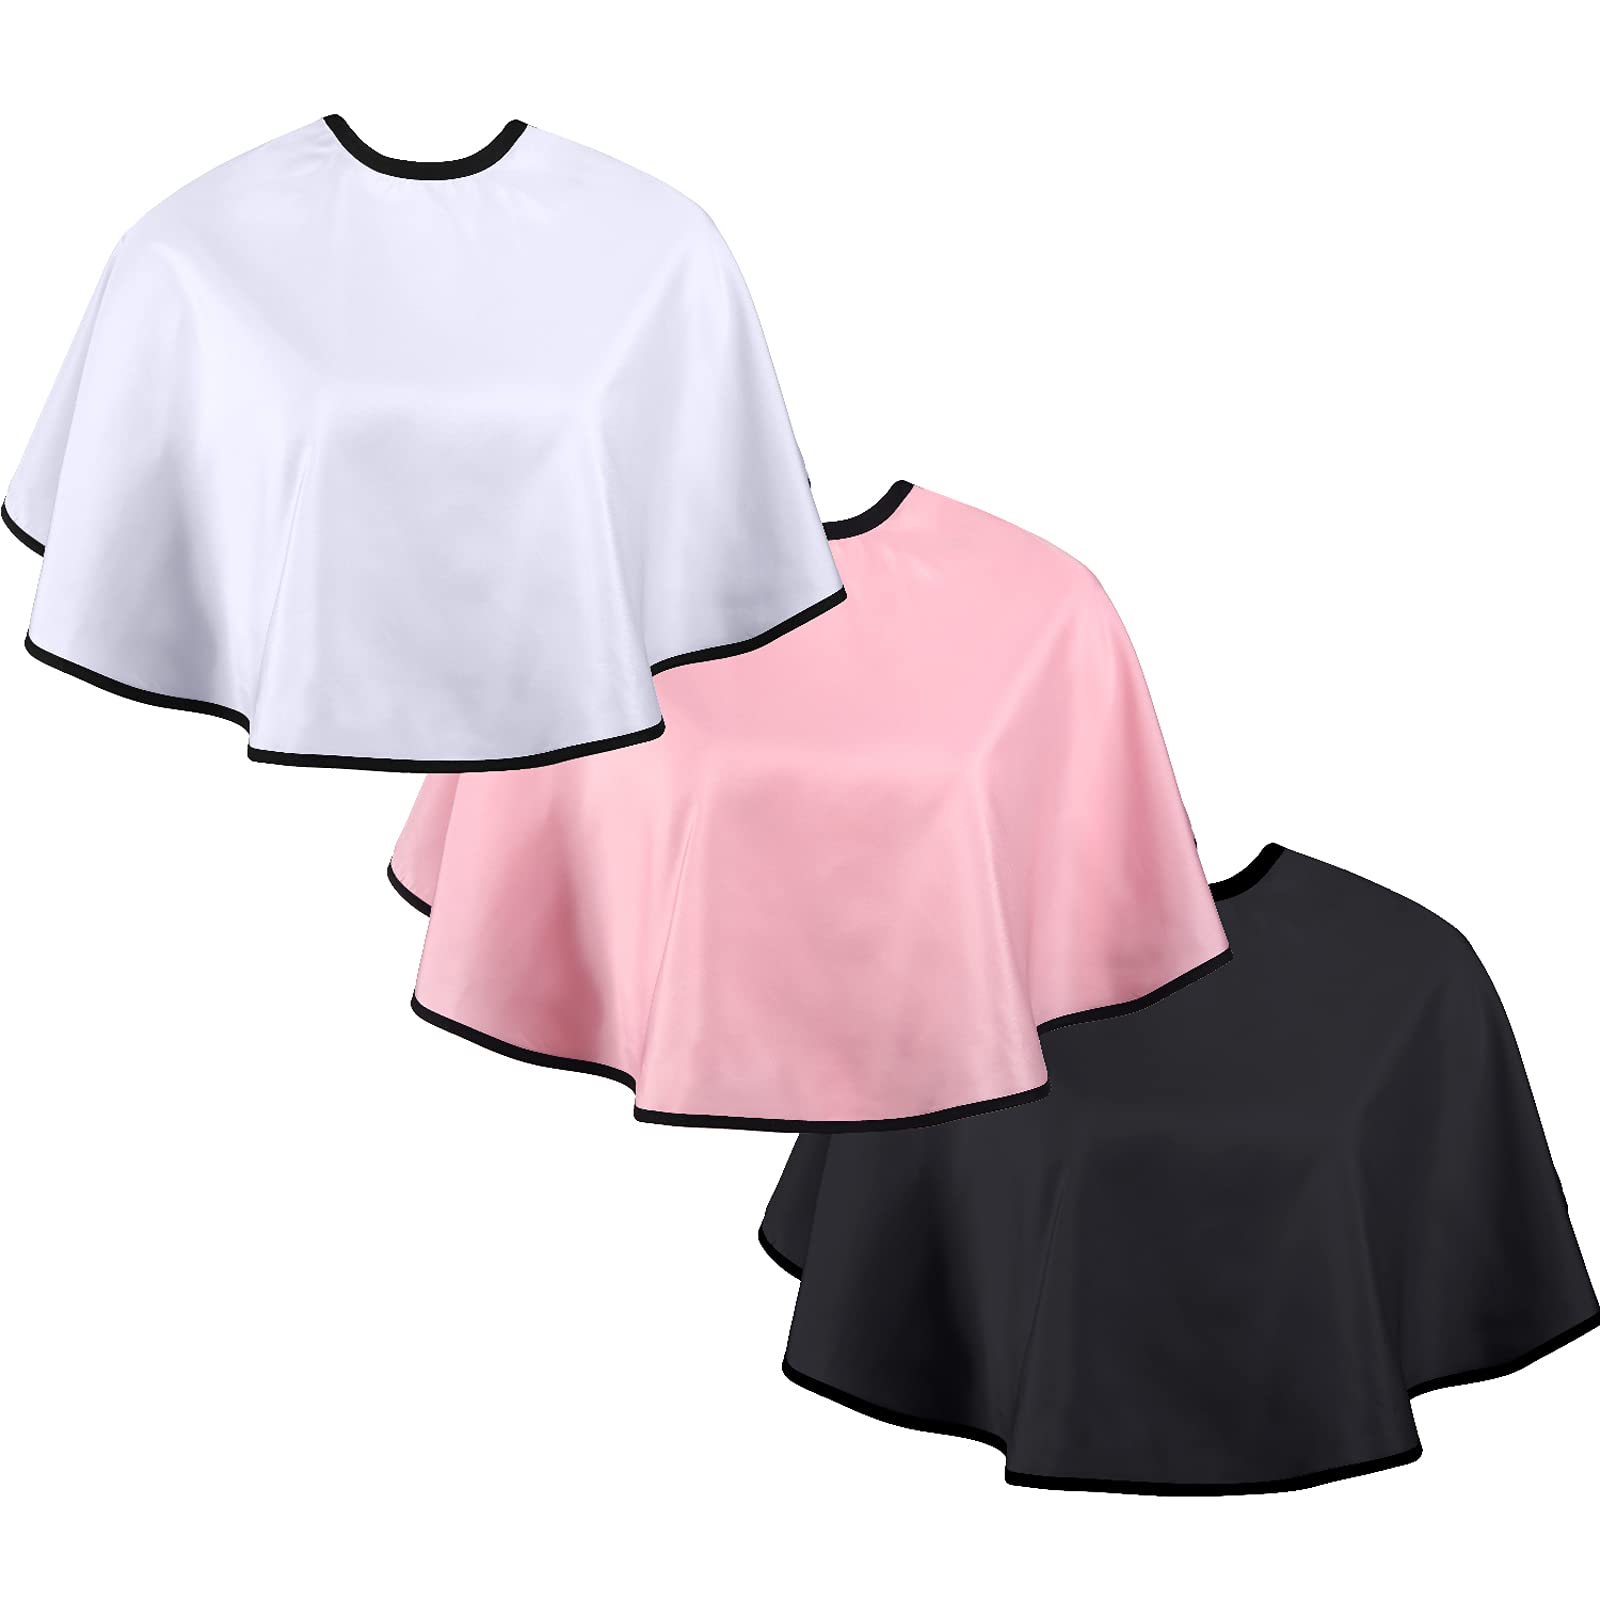 Noverlife Black Makeup Cape, Chemical & Water Proof Beauty Salon Shorty  Smock for Clients, Lightweight Comb-out Beard Apron Shortie Makeup Bib  Styling